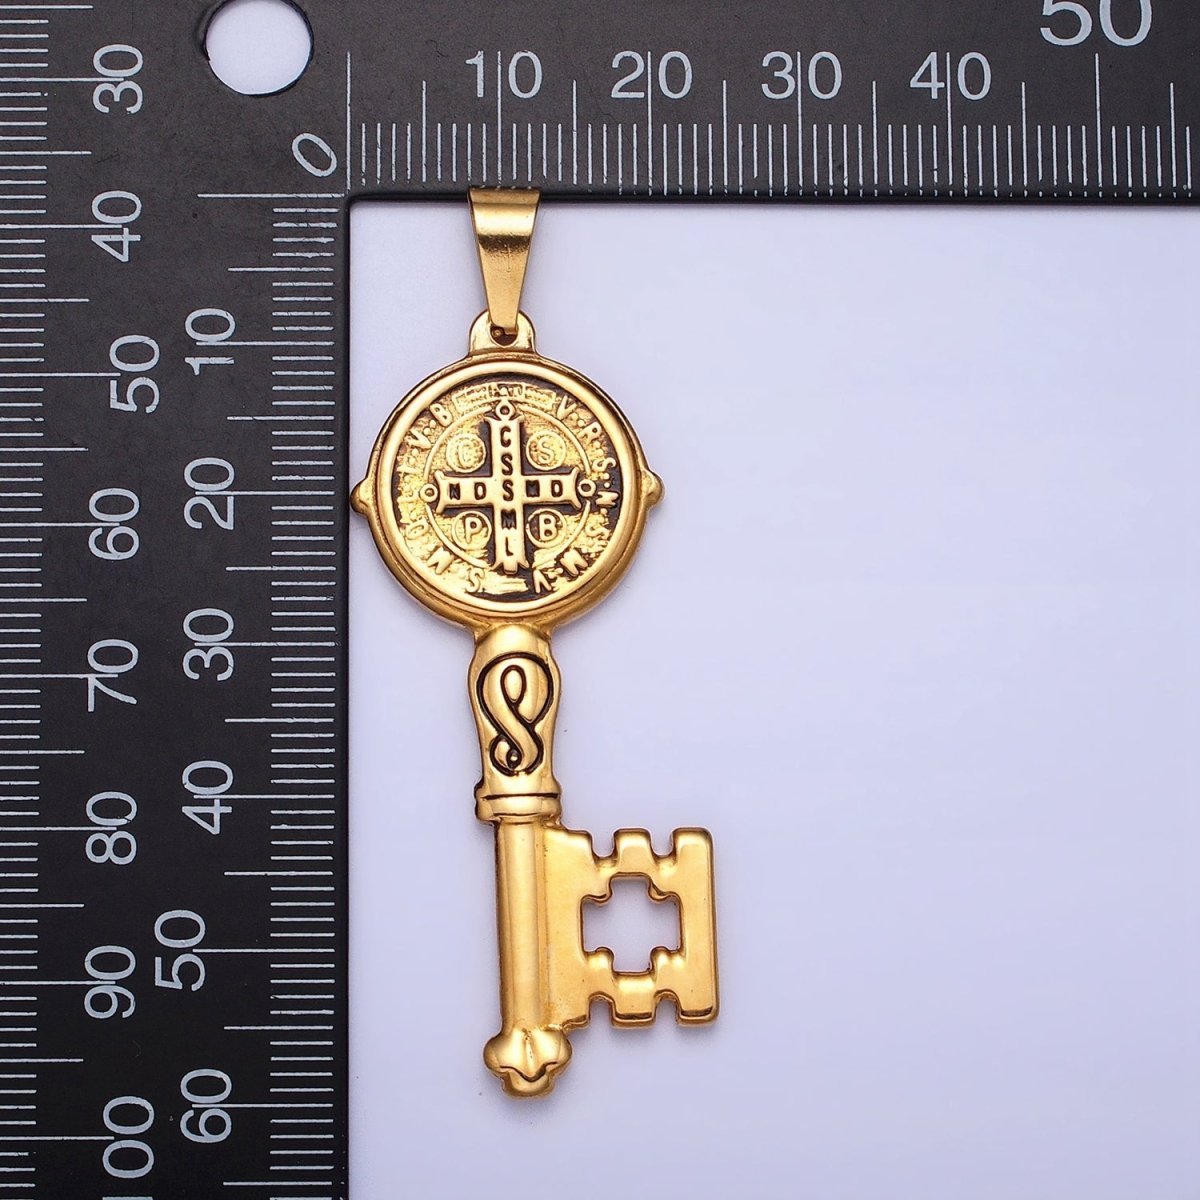 Stainless Steel SMQLIVB PAX VRSNSMV Saint Benedict Double Sided Engraved Key Pendant in Gold & Silver | P-1089 P-1090 - DLUXCA